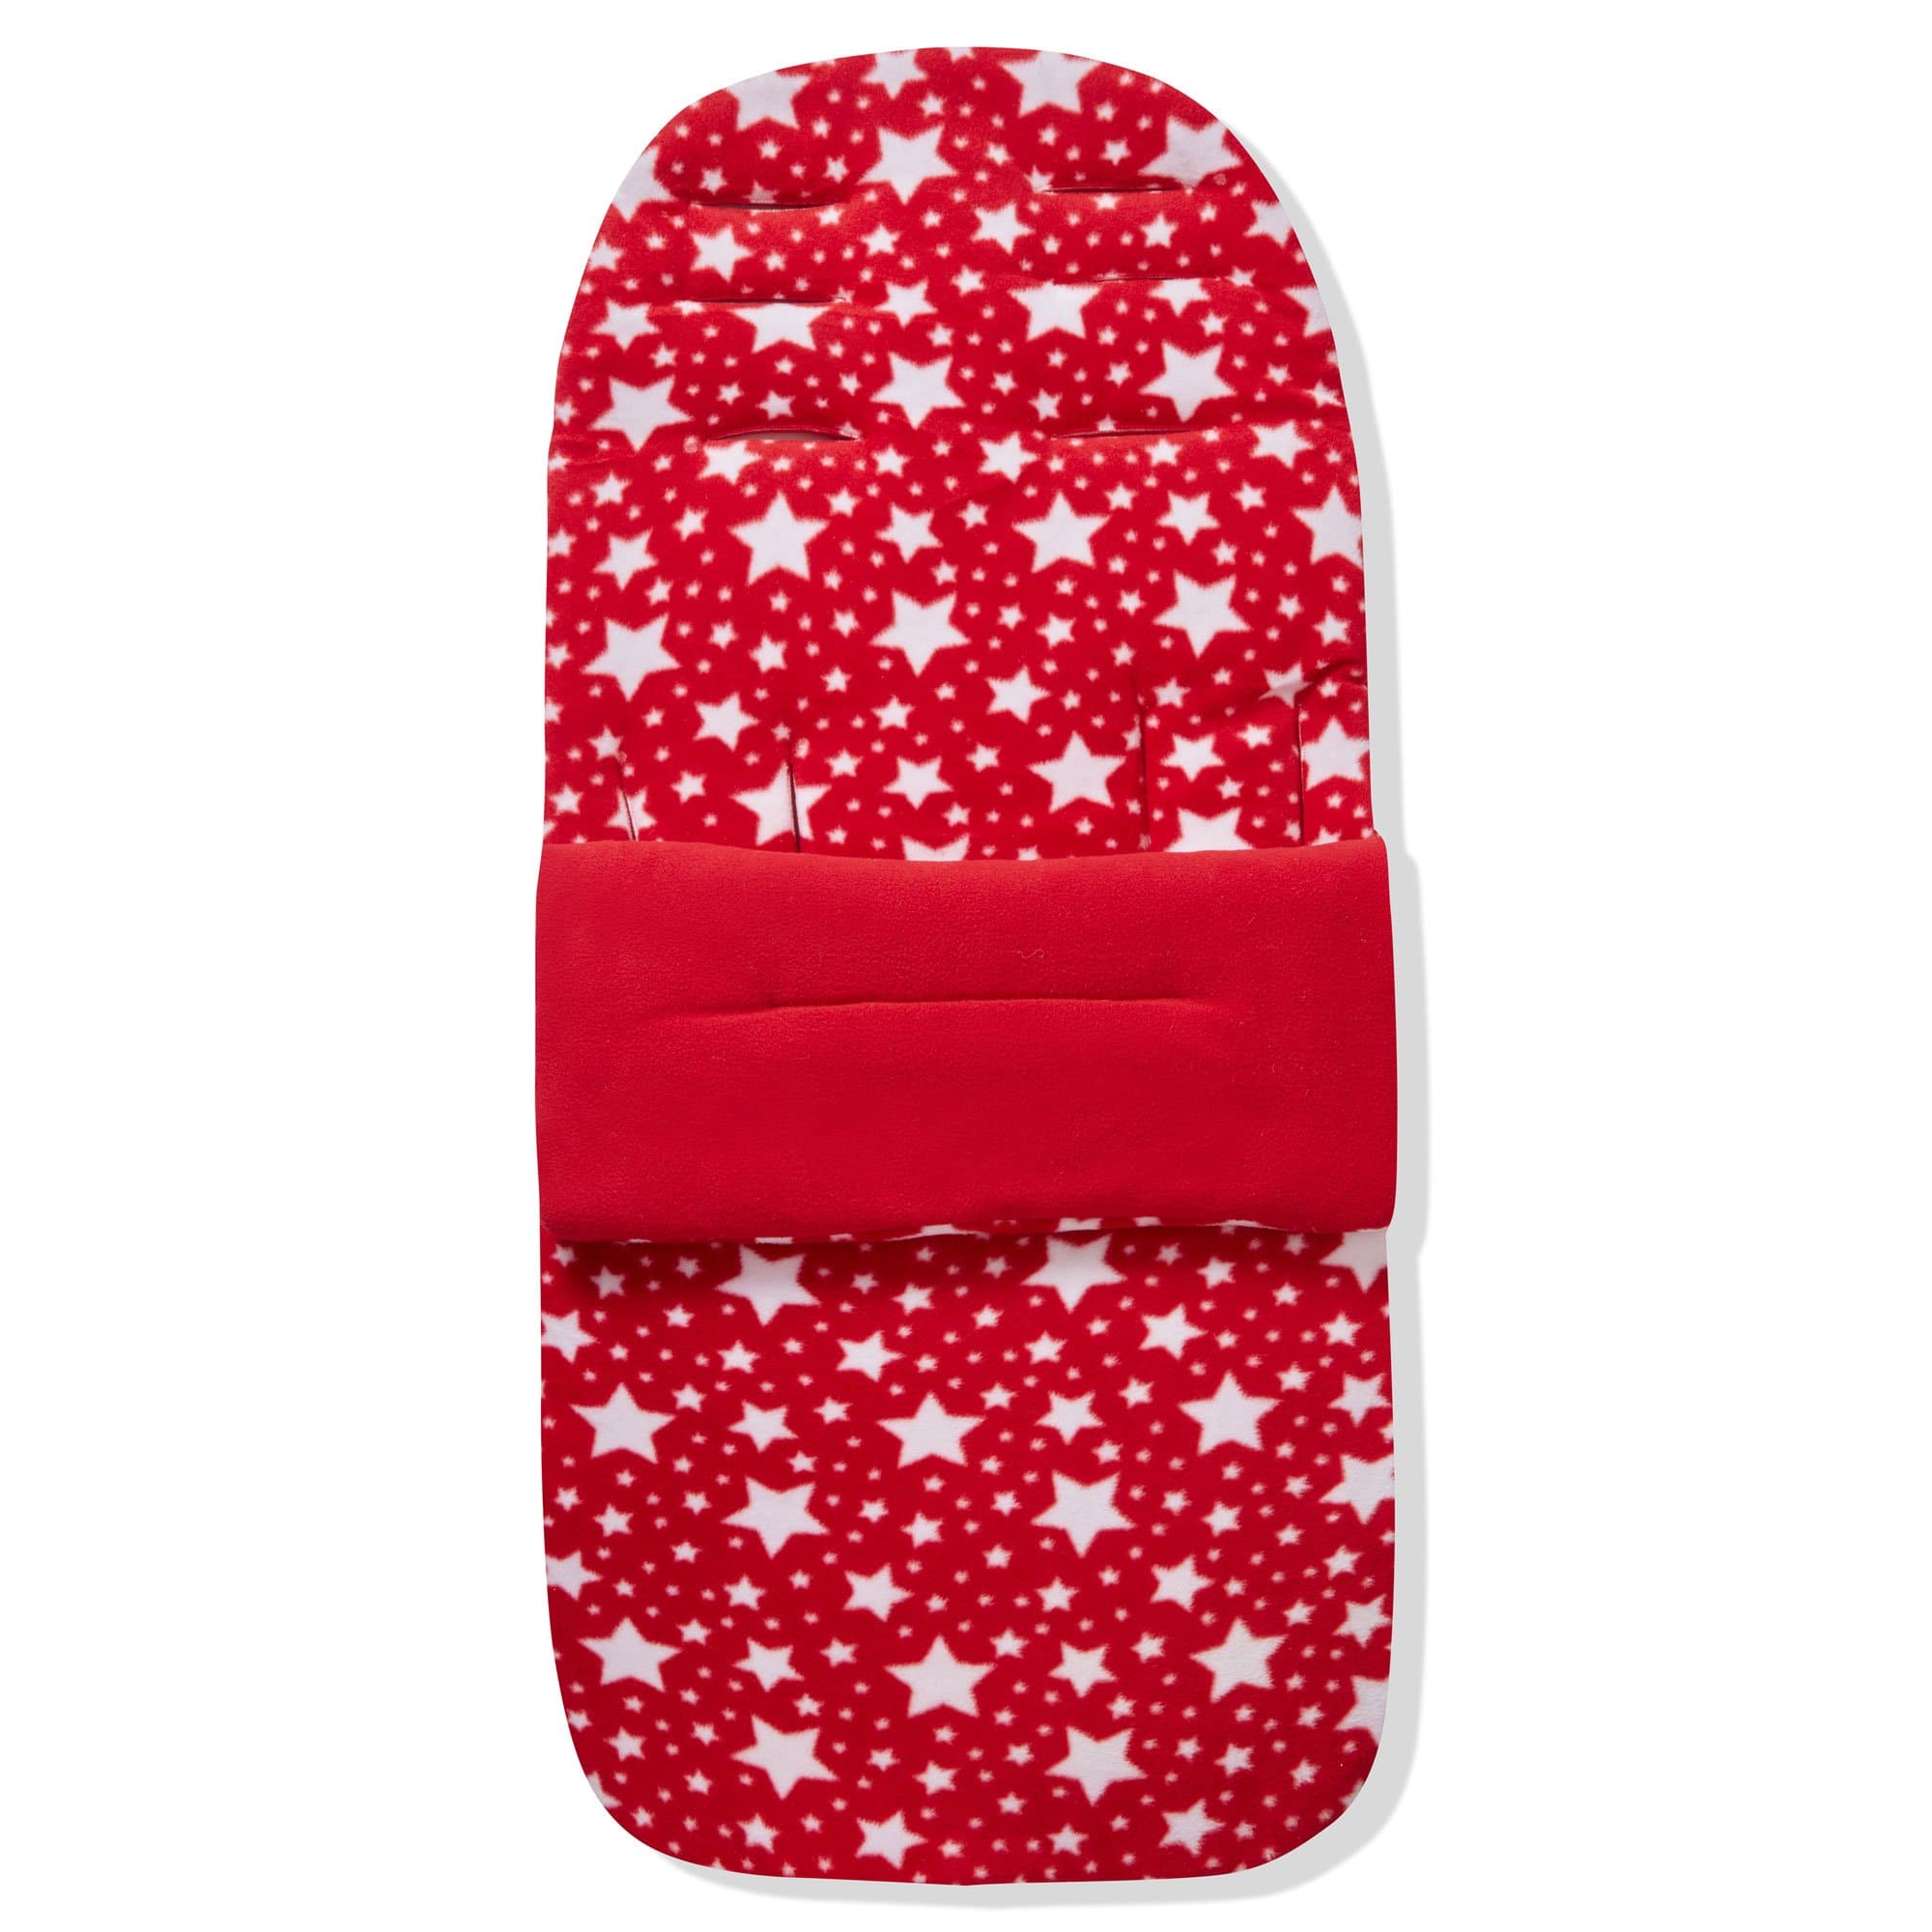 Fleece Footmuff / Cosy Toes Compatible with Hesba - Red Star / Fits All Models | For Your Little One